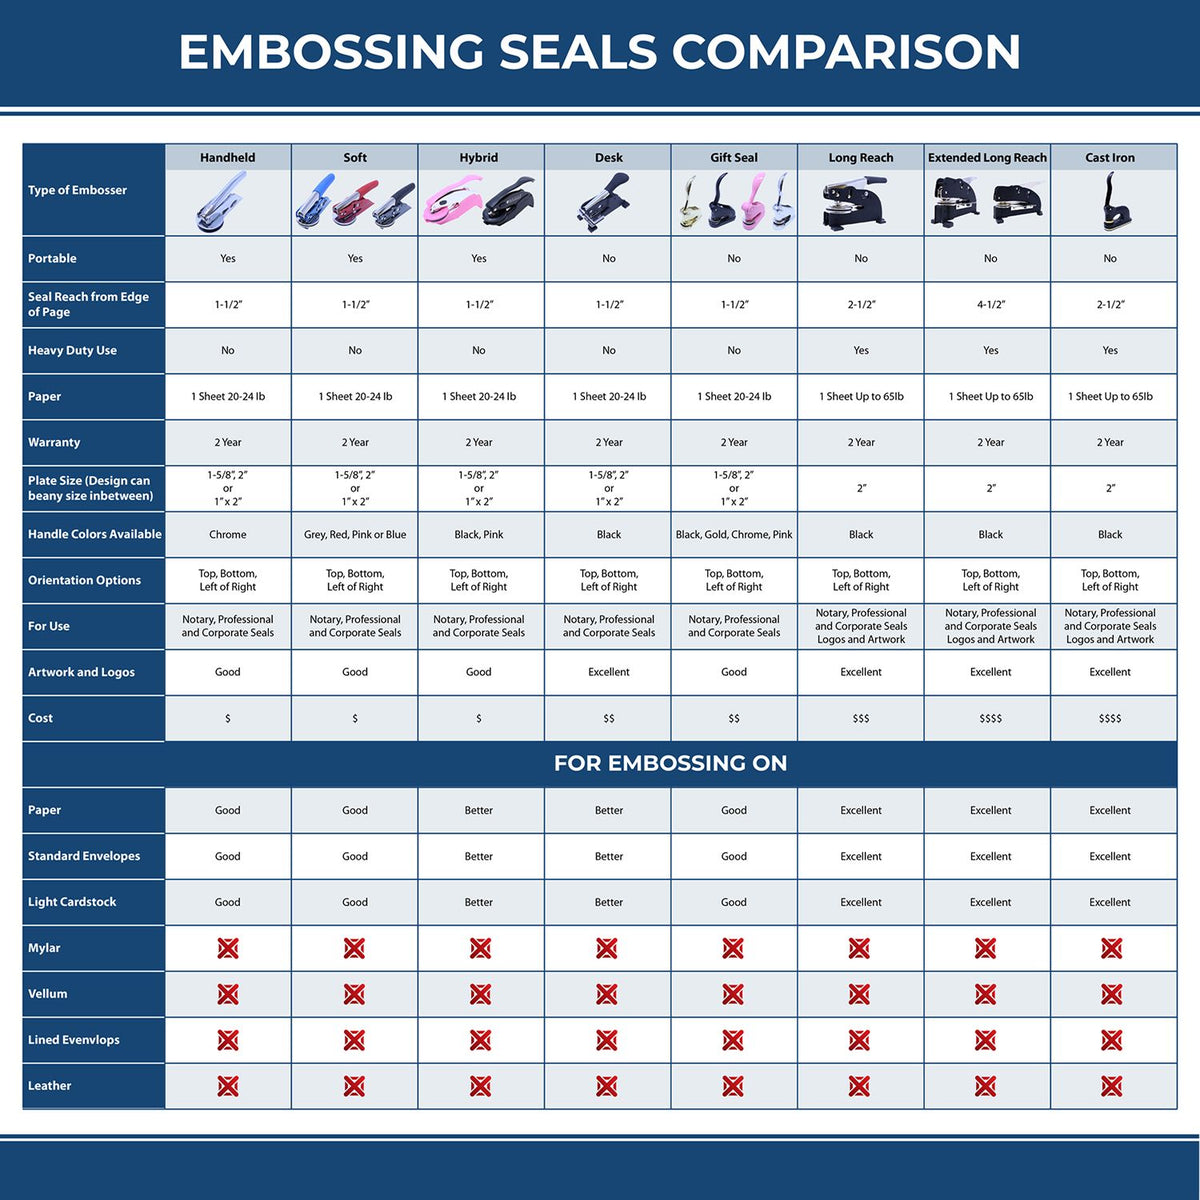 A comparison chart for the different types of mount models available for the Handheld Illinois Professional Engineer Embosser.